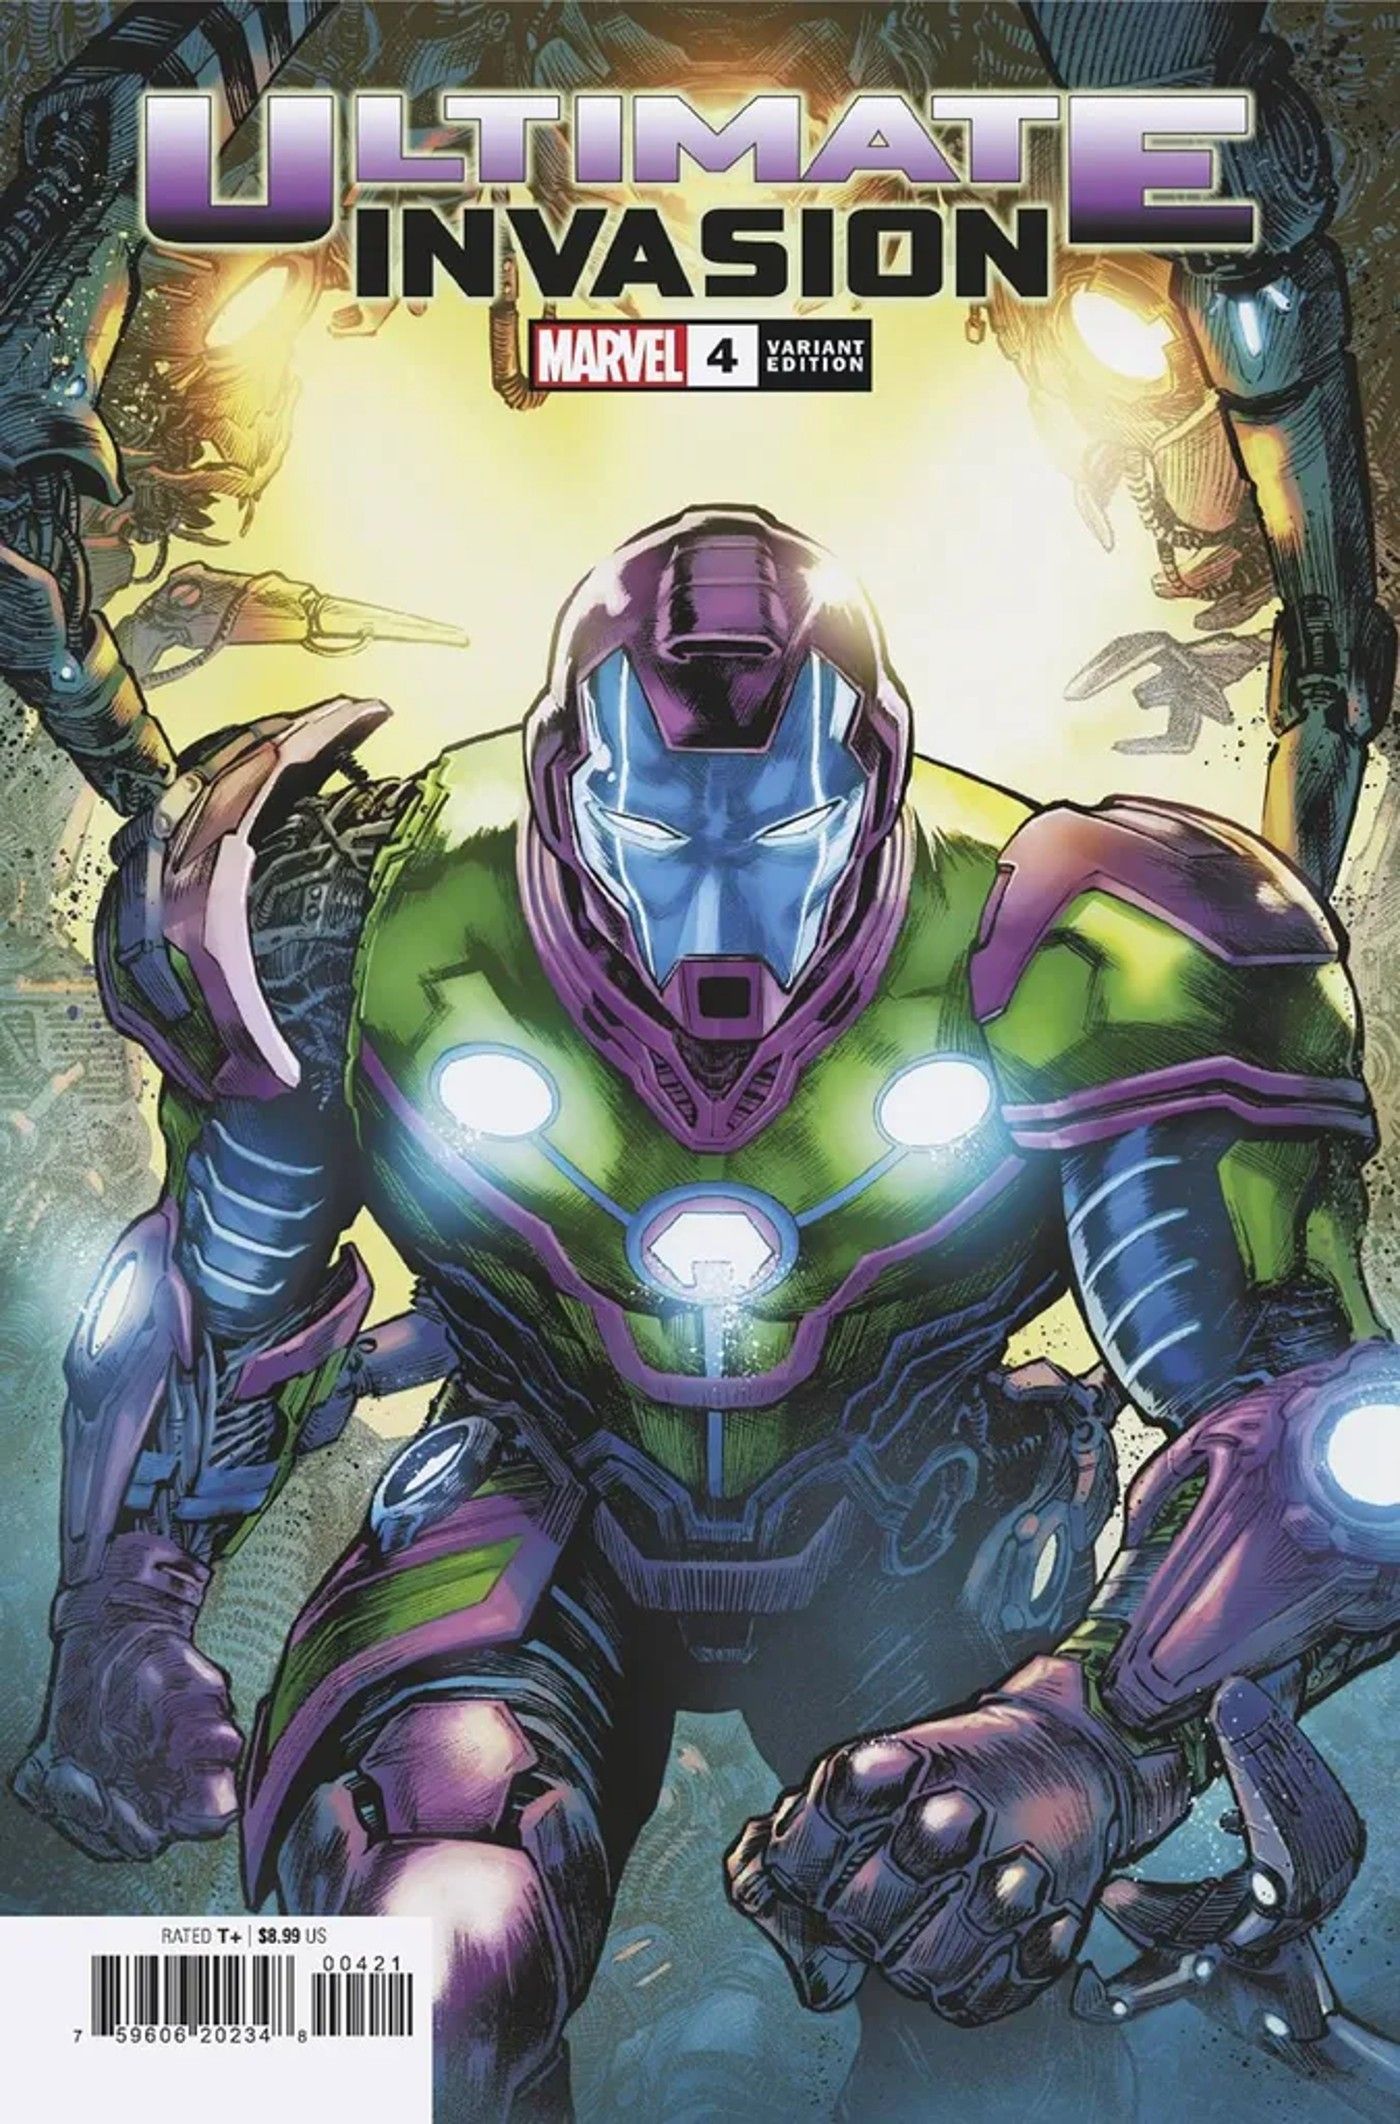 Marvel's Big Twist: Is Iron Man the New Face of Kang in Ultimate Invasion?